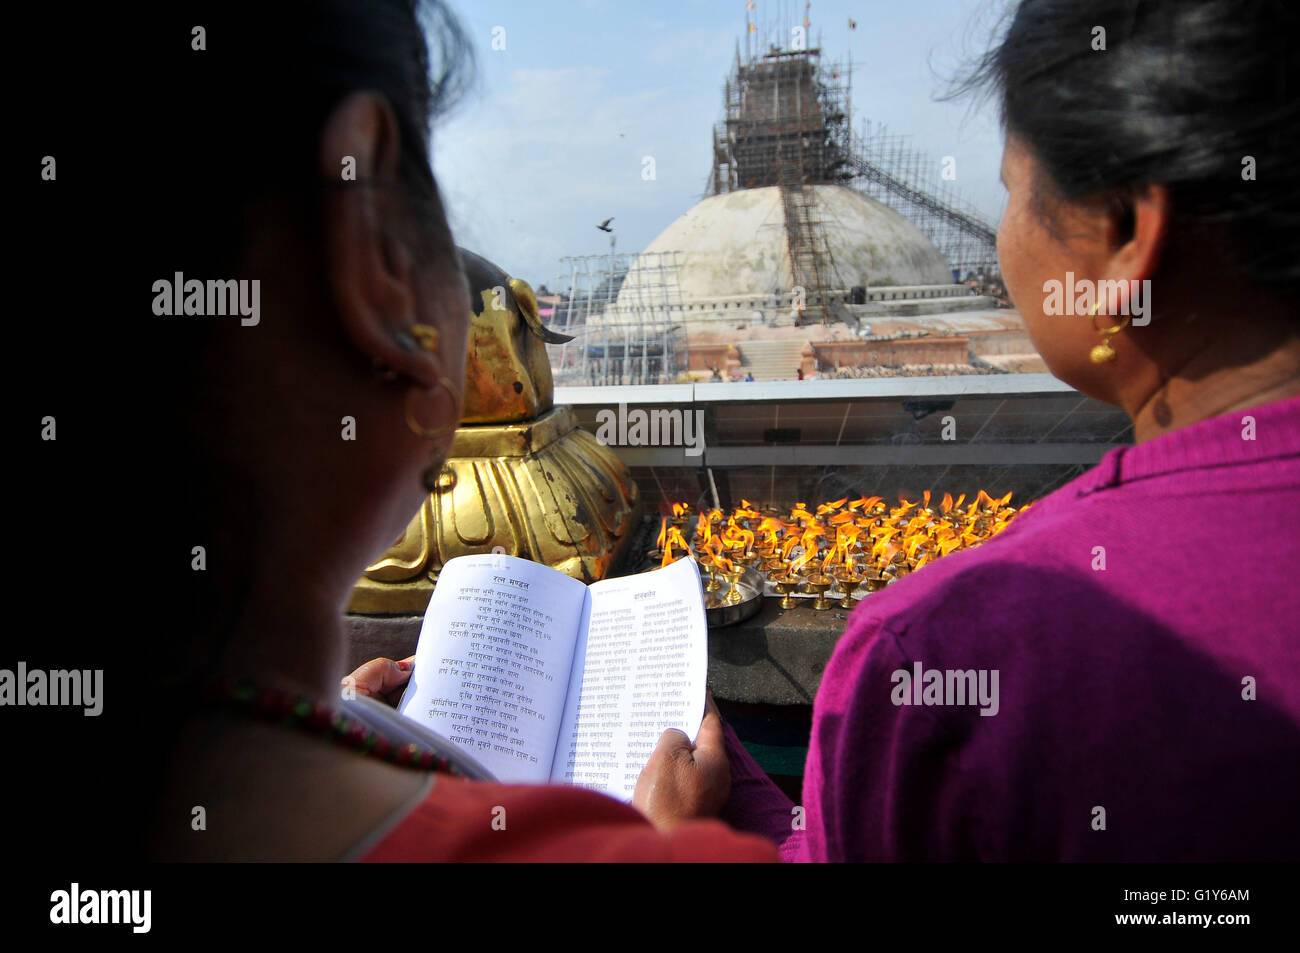 Devotee offering rituals prayer at the Boudhanath stupa, one of the largest stupas in the world during celebration the 2,560th Buddha Purnima festival, Birth Anniversary of Lord Gautam Buddha at Boudhanath Stupa, Kathmandu on May 21, 2016. Buddhists around the world, Cambodia; Thailand; Myanmar; Bhutan; Sri Lanka; Laos; Mongolia; Japan; Singapore; Taiwan including Nepal, observe Buddha Purnima festival which falls on the same day of full moon of the month calendar. The occasion offerings of flower, incense and candles, an exchange of gifts as blessings, prayers, sermons and group meditations. Stock Photo